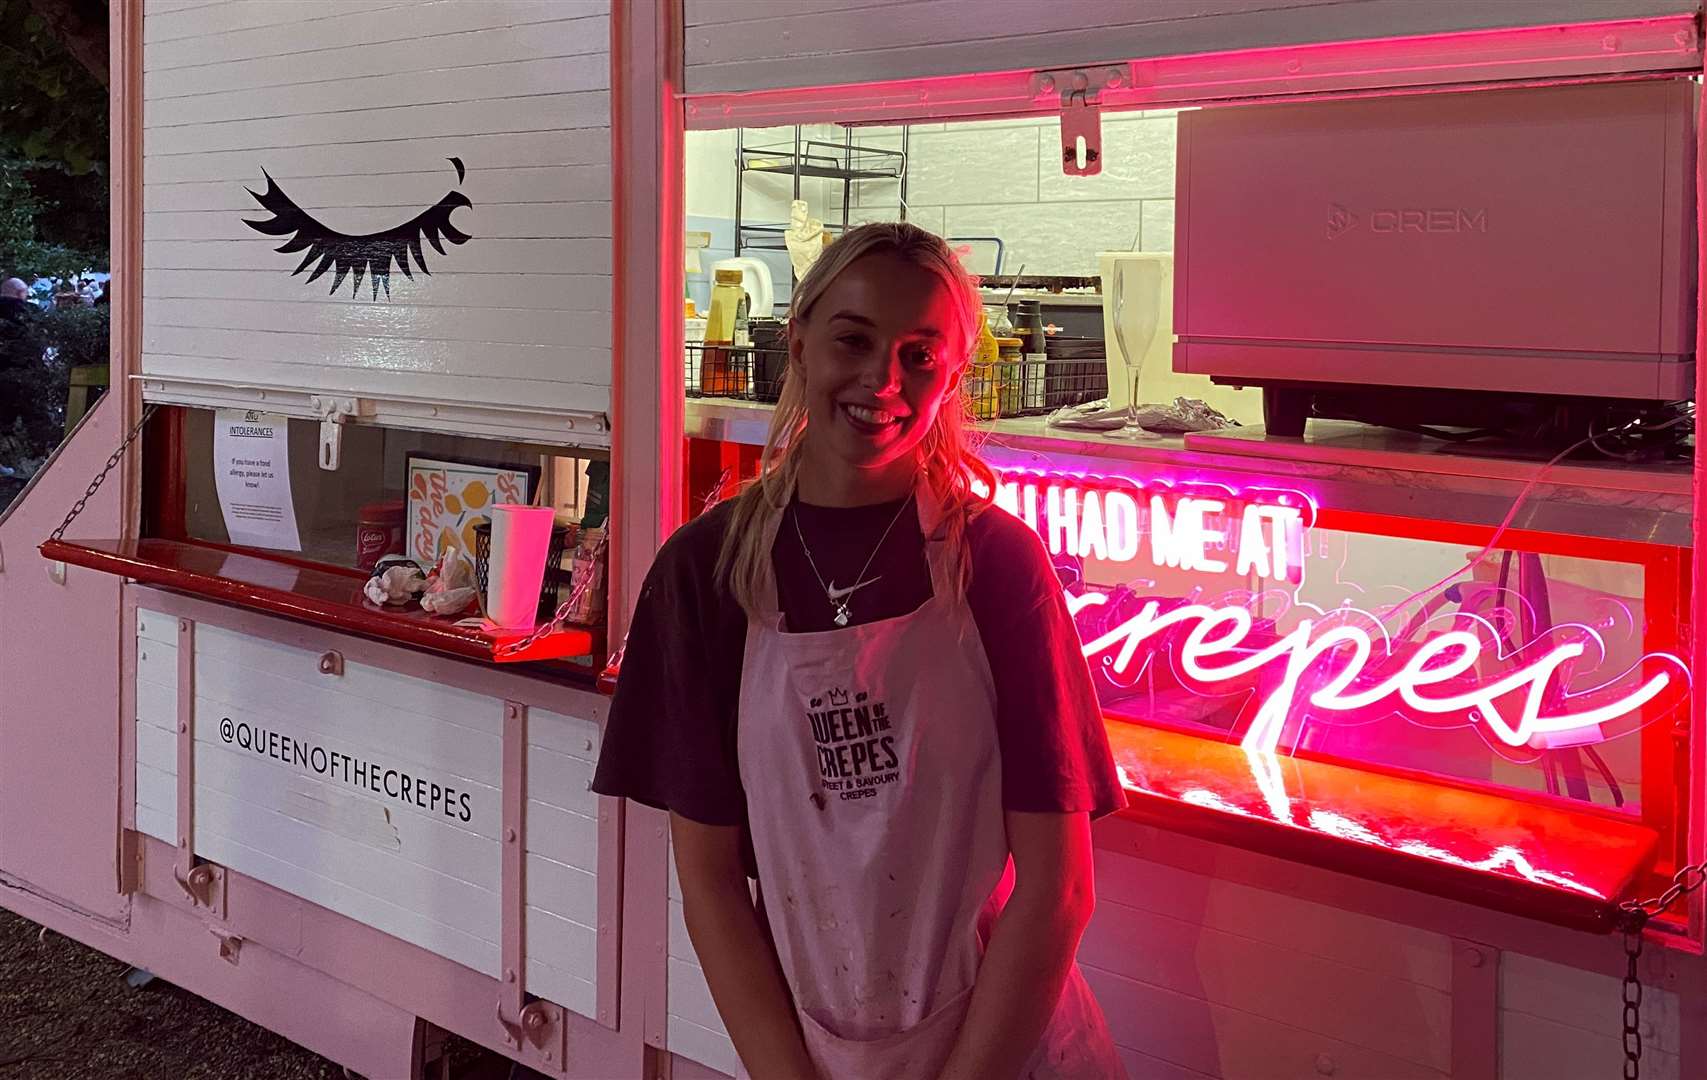 Queen of the Crepes herself, Eve Steere, said her pink food truck brought in around £2,500 at the Smoked & Uncut Festival in Bridge, near Canterbury